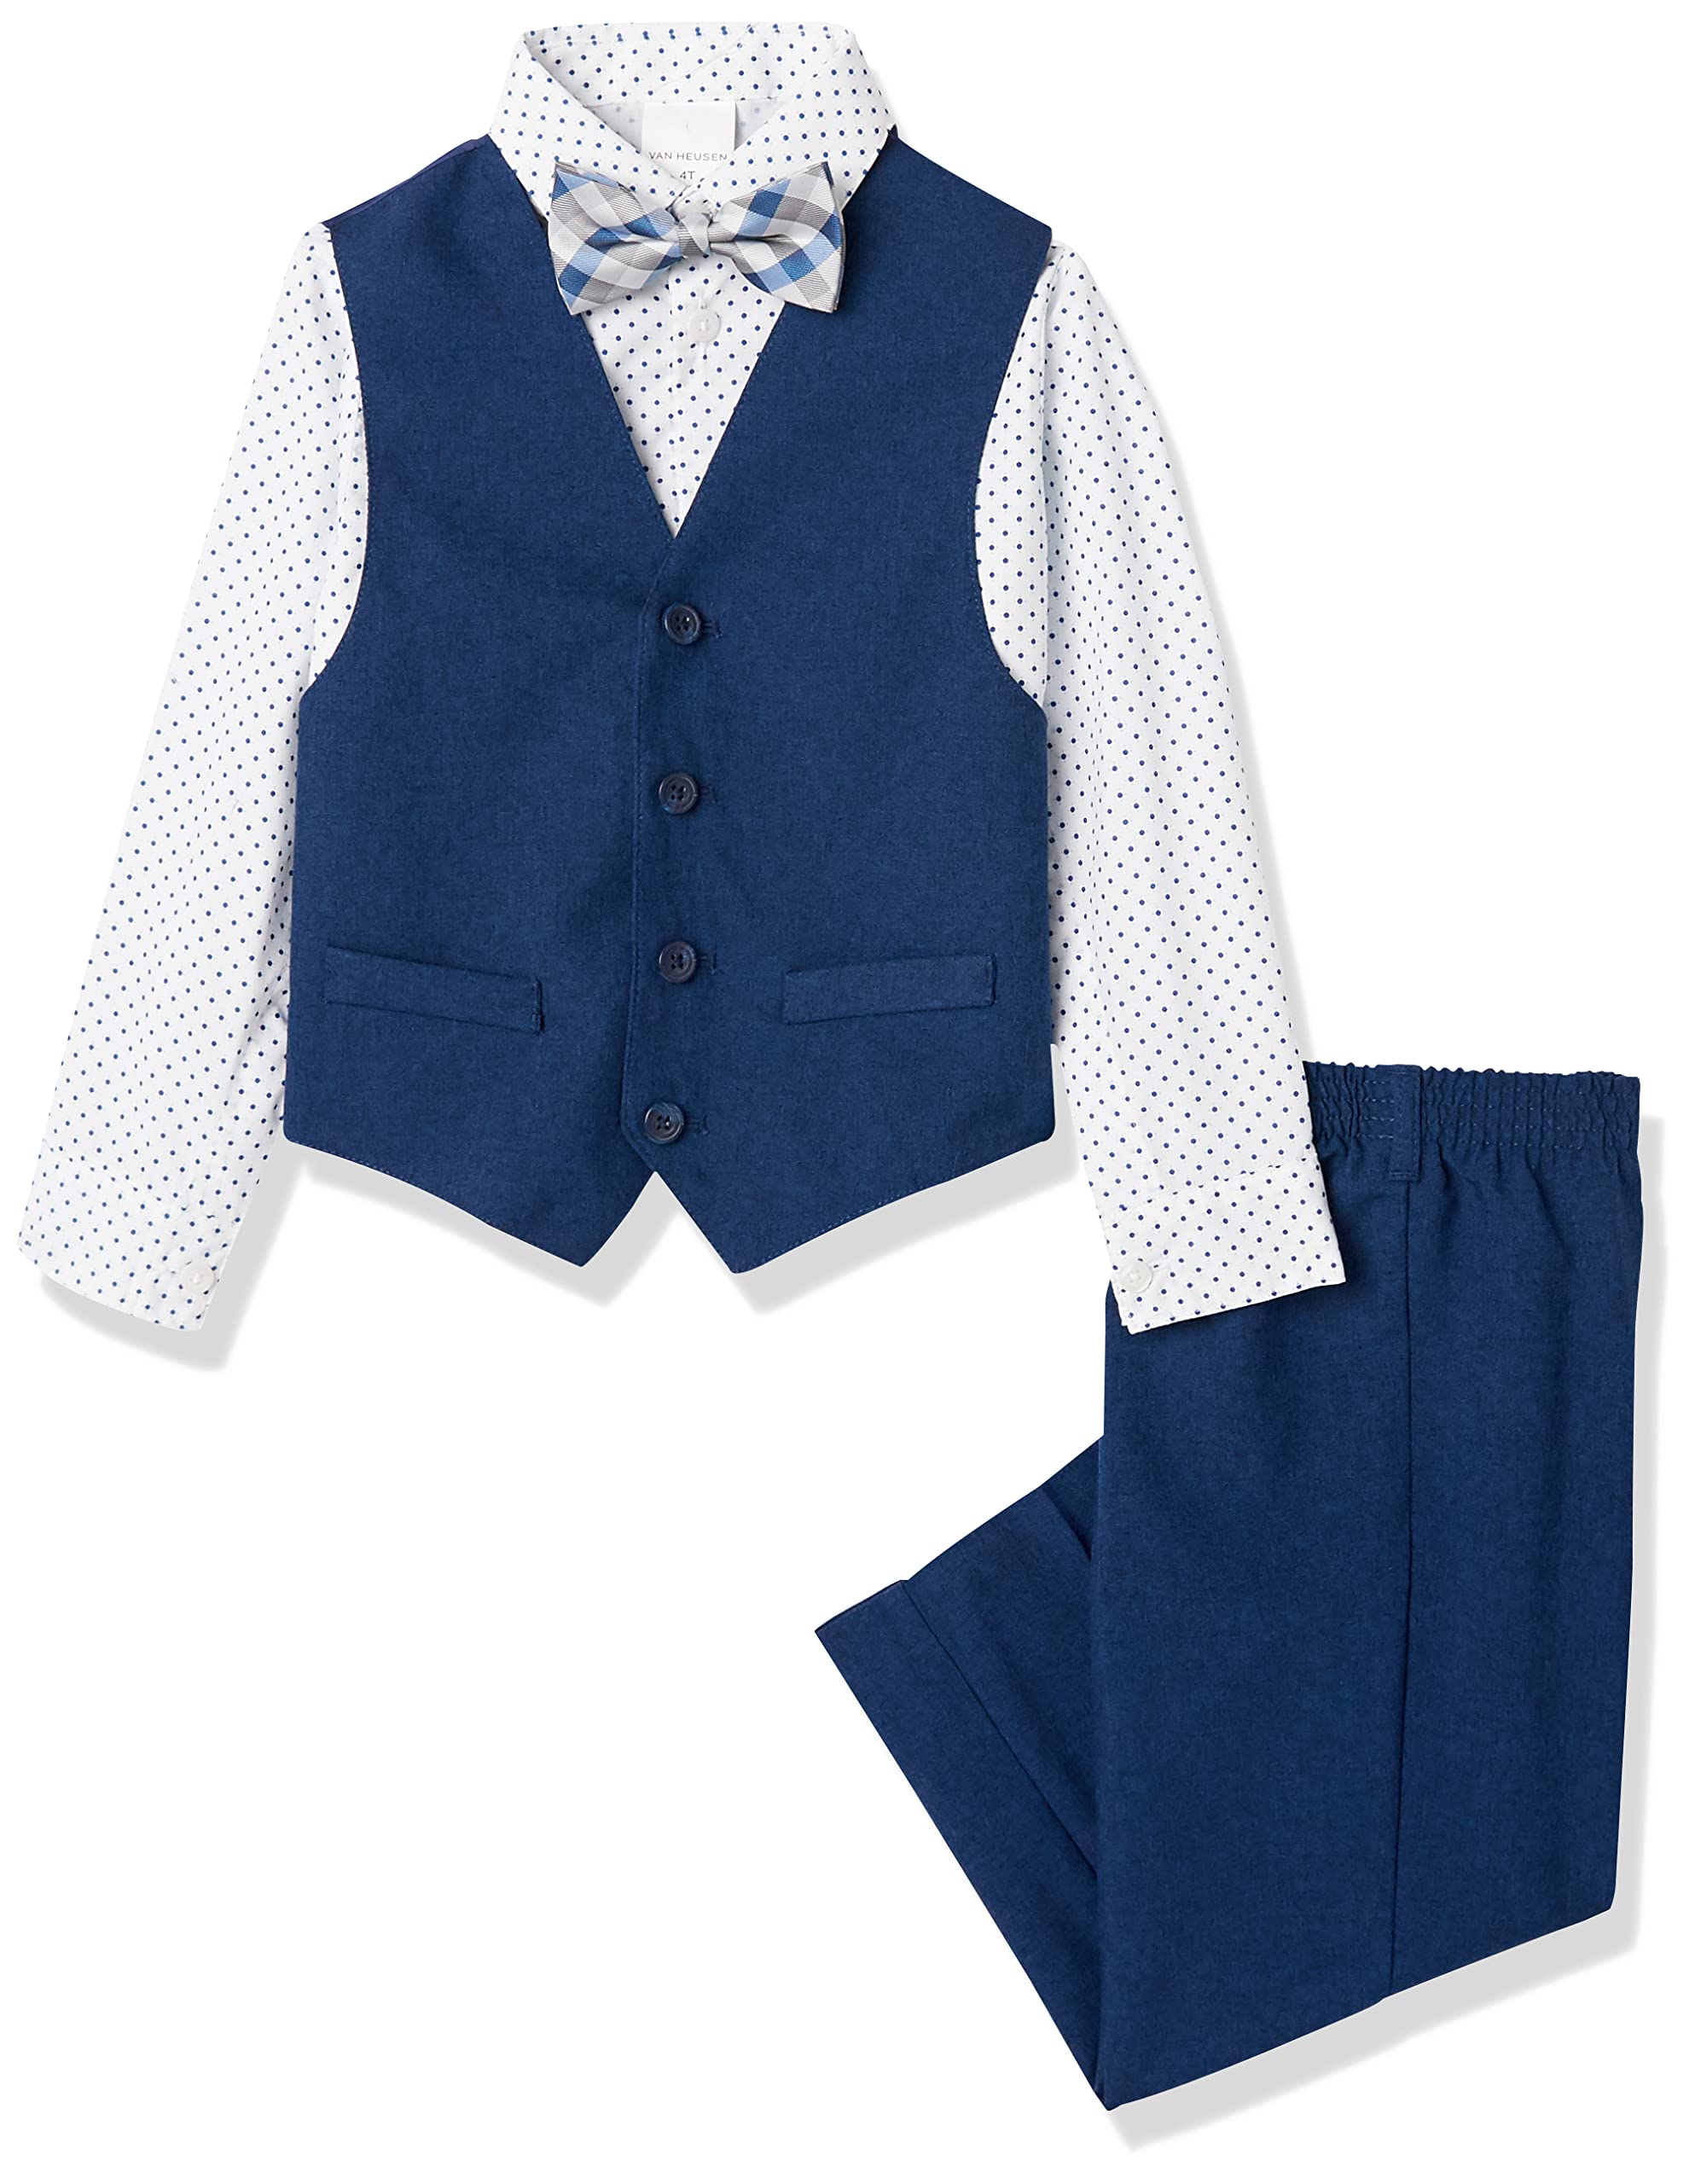 Van Heusen Boys' Adaptive 4-Piece Formal Suit Set, Vest, Pants, Collared Dress Shirt, and Bow Tie with Velcro Closure